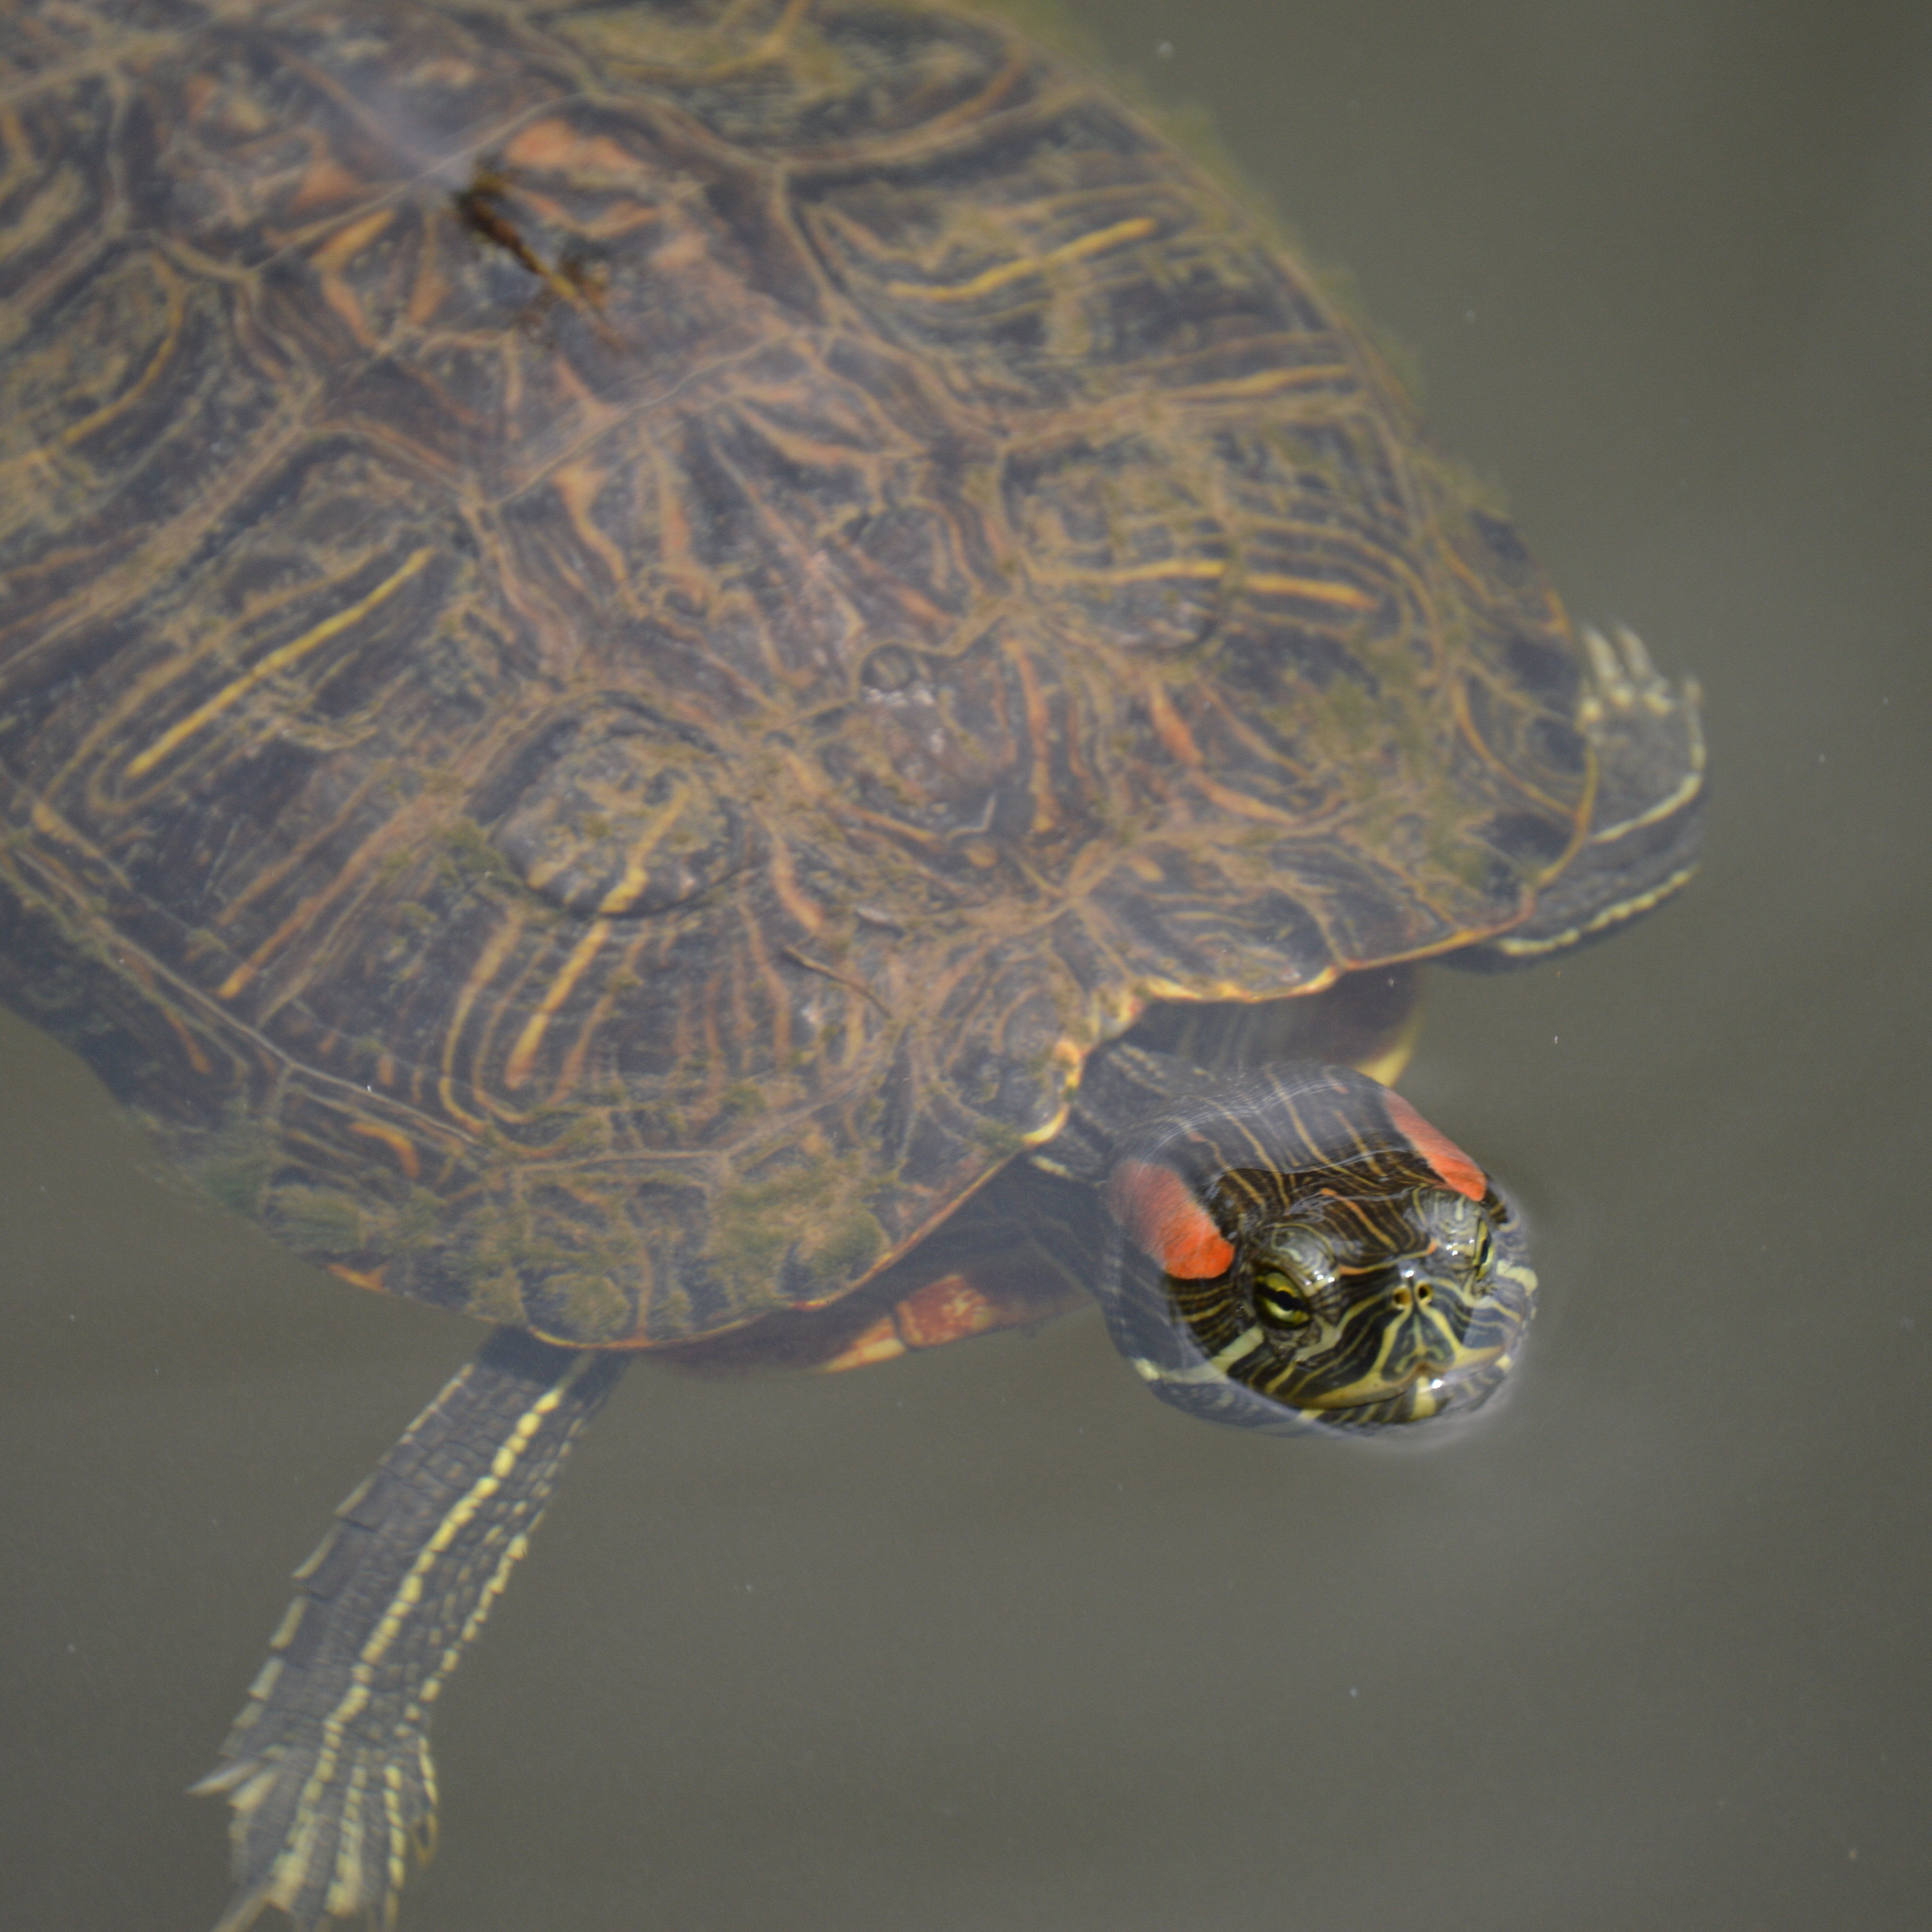 Red-eared slider turtle in water.